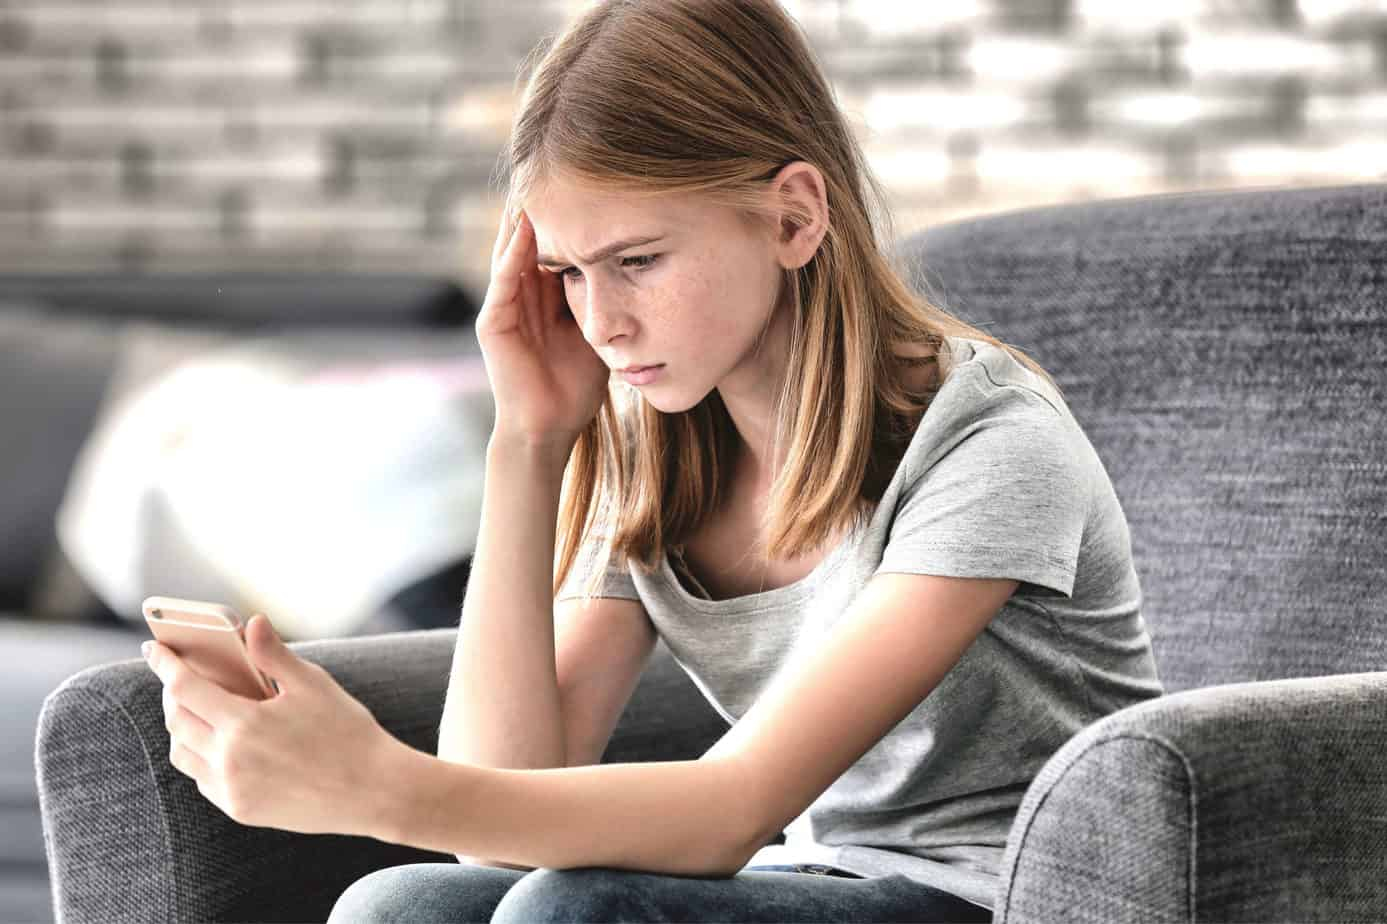 Teen Girls Whores - The Truth About Sexting: What Parents Should Know || Canopy